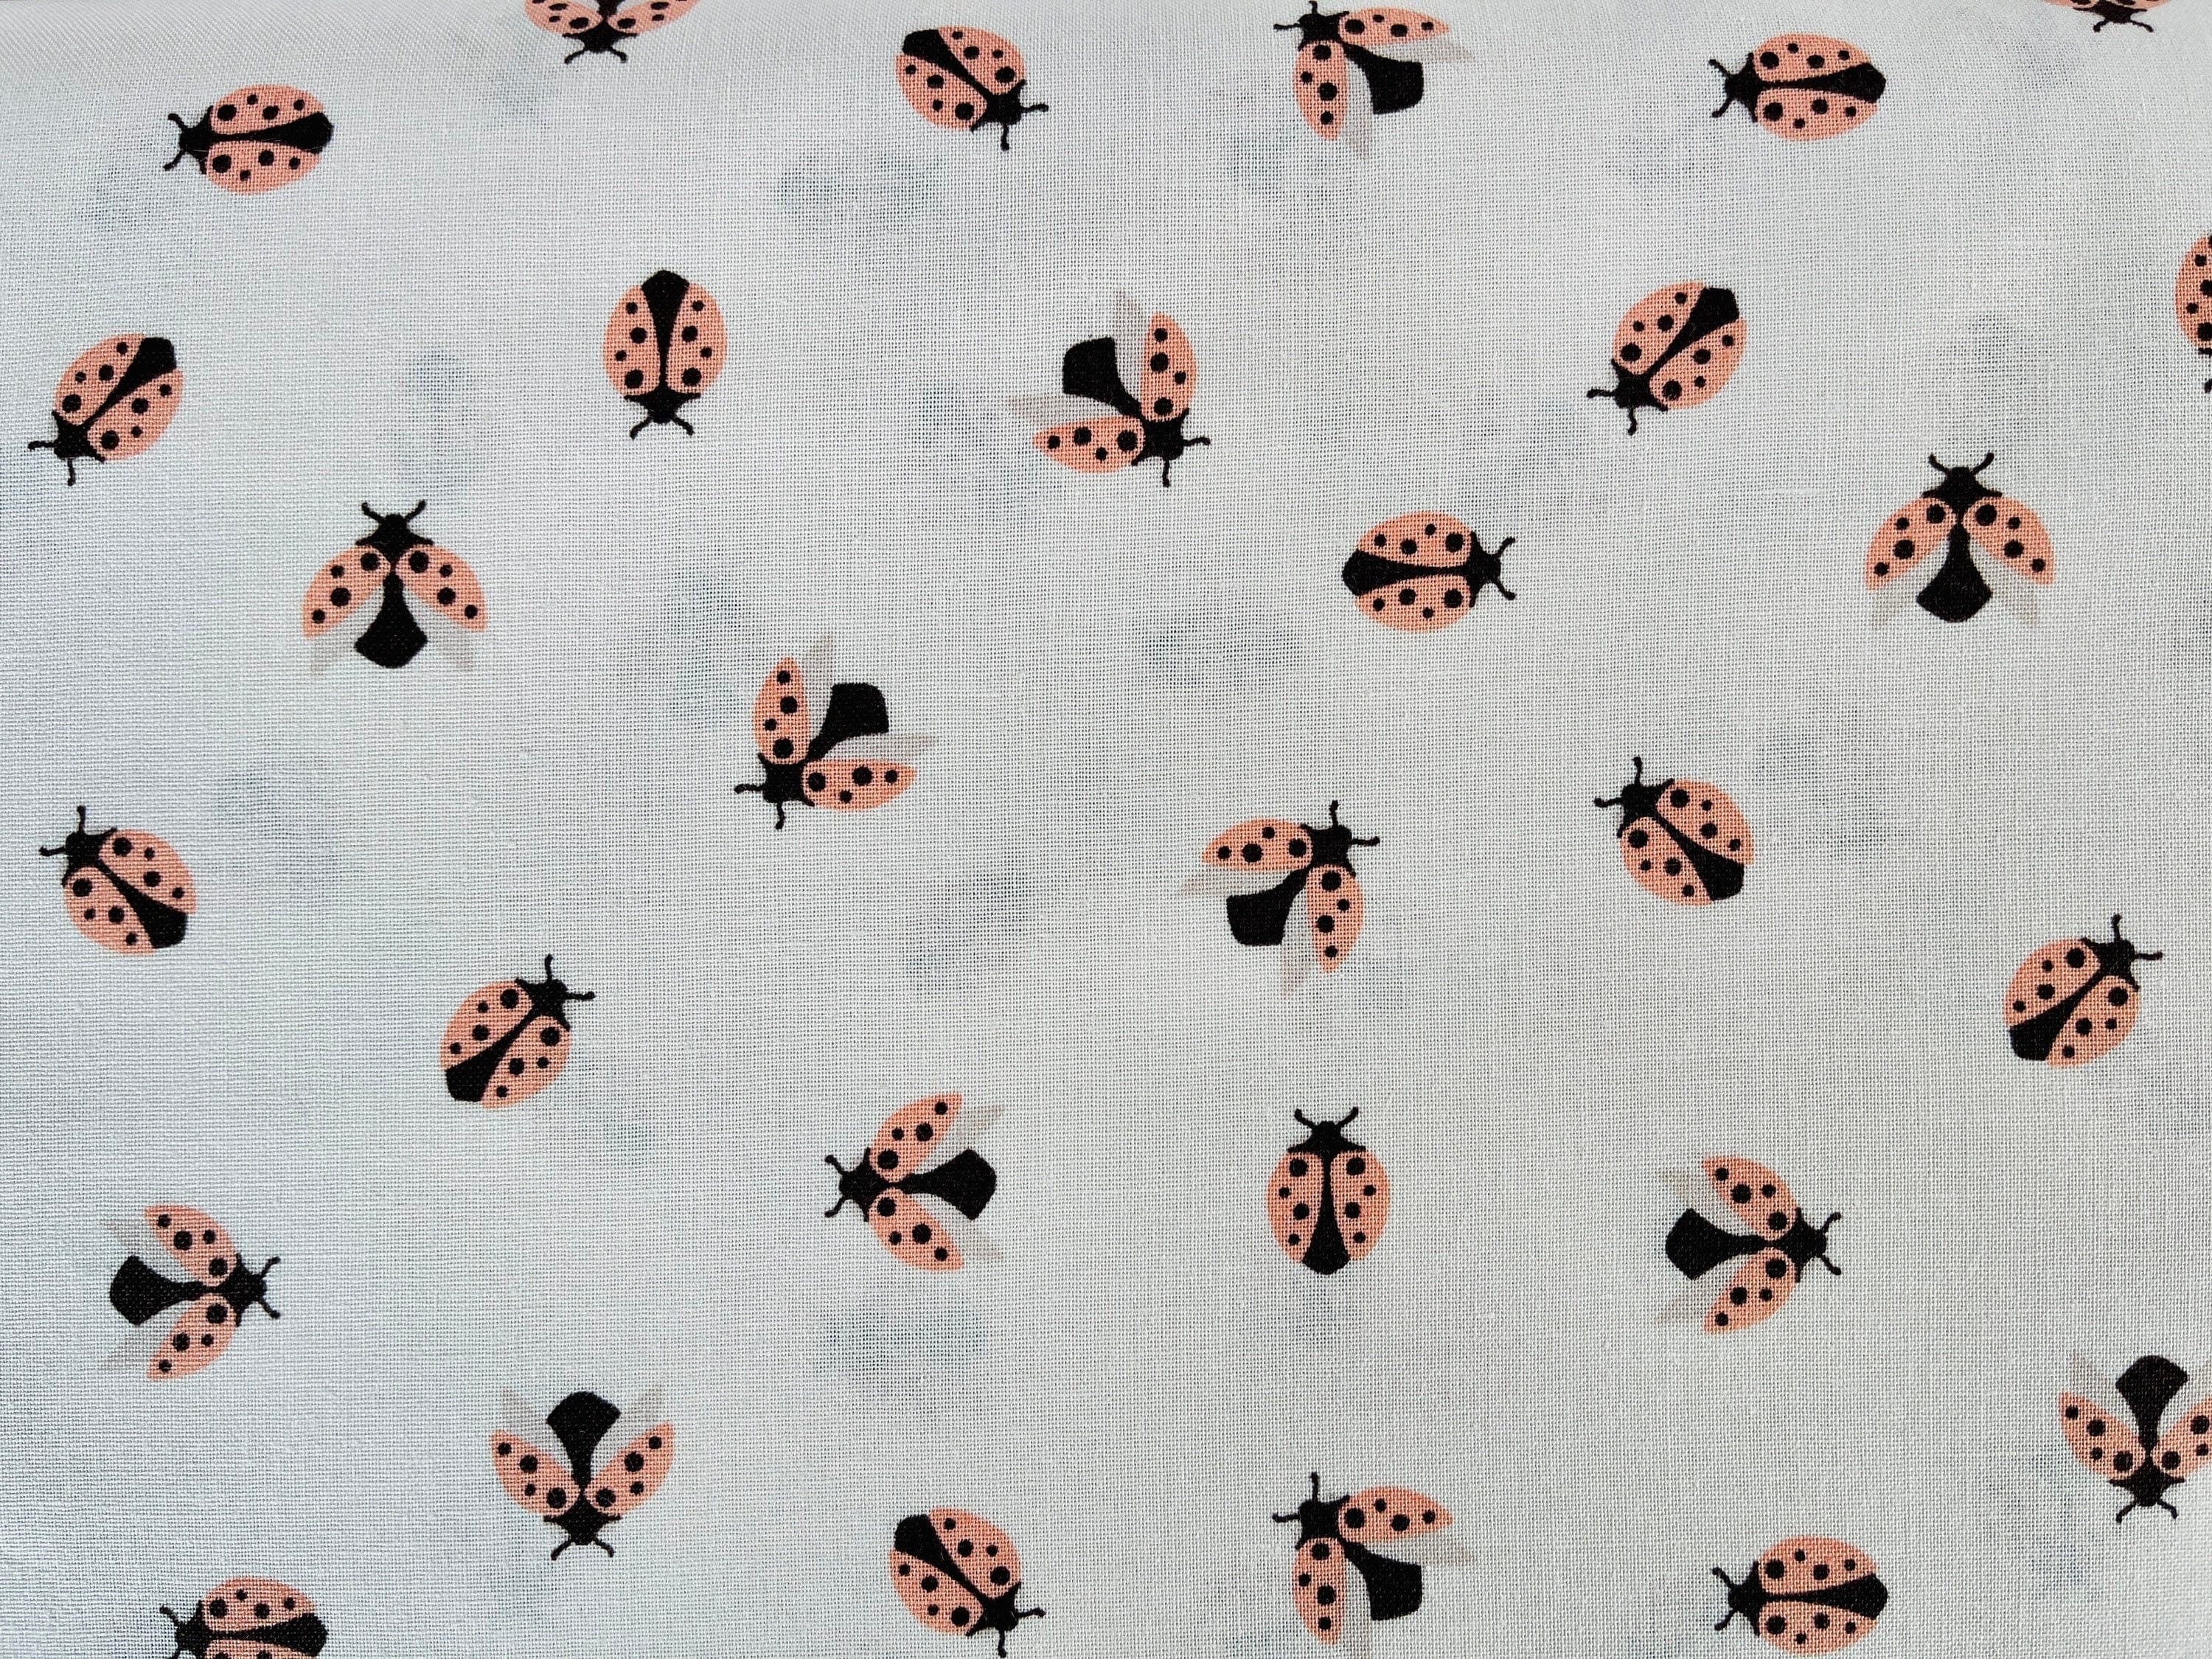 Wild and Free - Ladybug - Summer Vibes Fabric - Loes Van Oosten Cotton + Steel Quilting Cotton - LV602-SV2